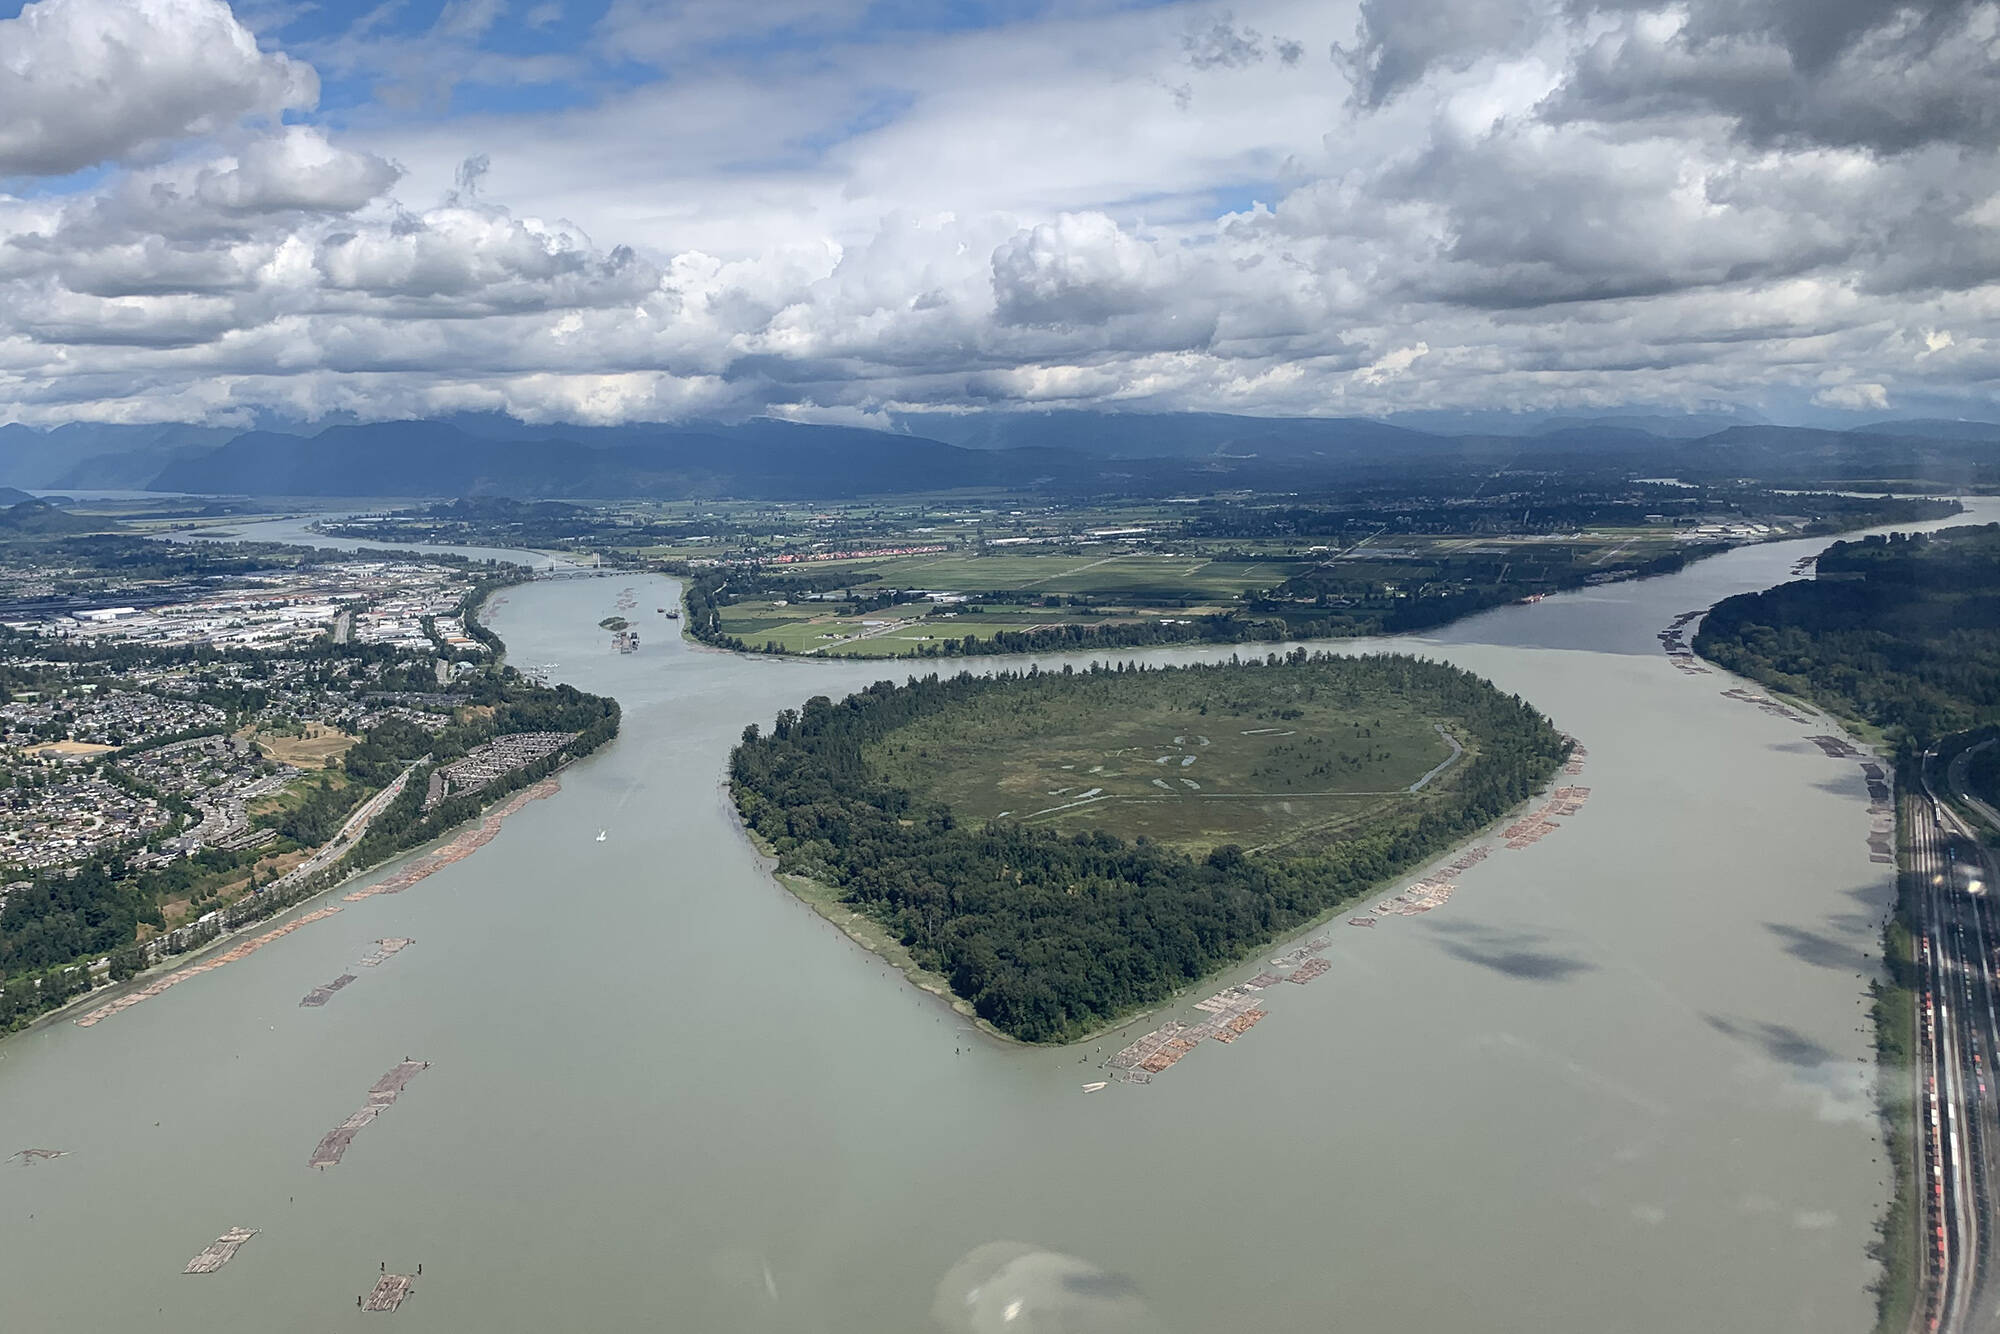 The Fraser River watershed is among the most threatened in Canada, according to the World Wildlife Foundation. The province has committed $100 million toward a permanent to fund protect watersheds. (Jessica Peters/Abbotsford News)